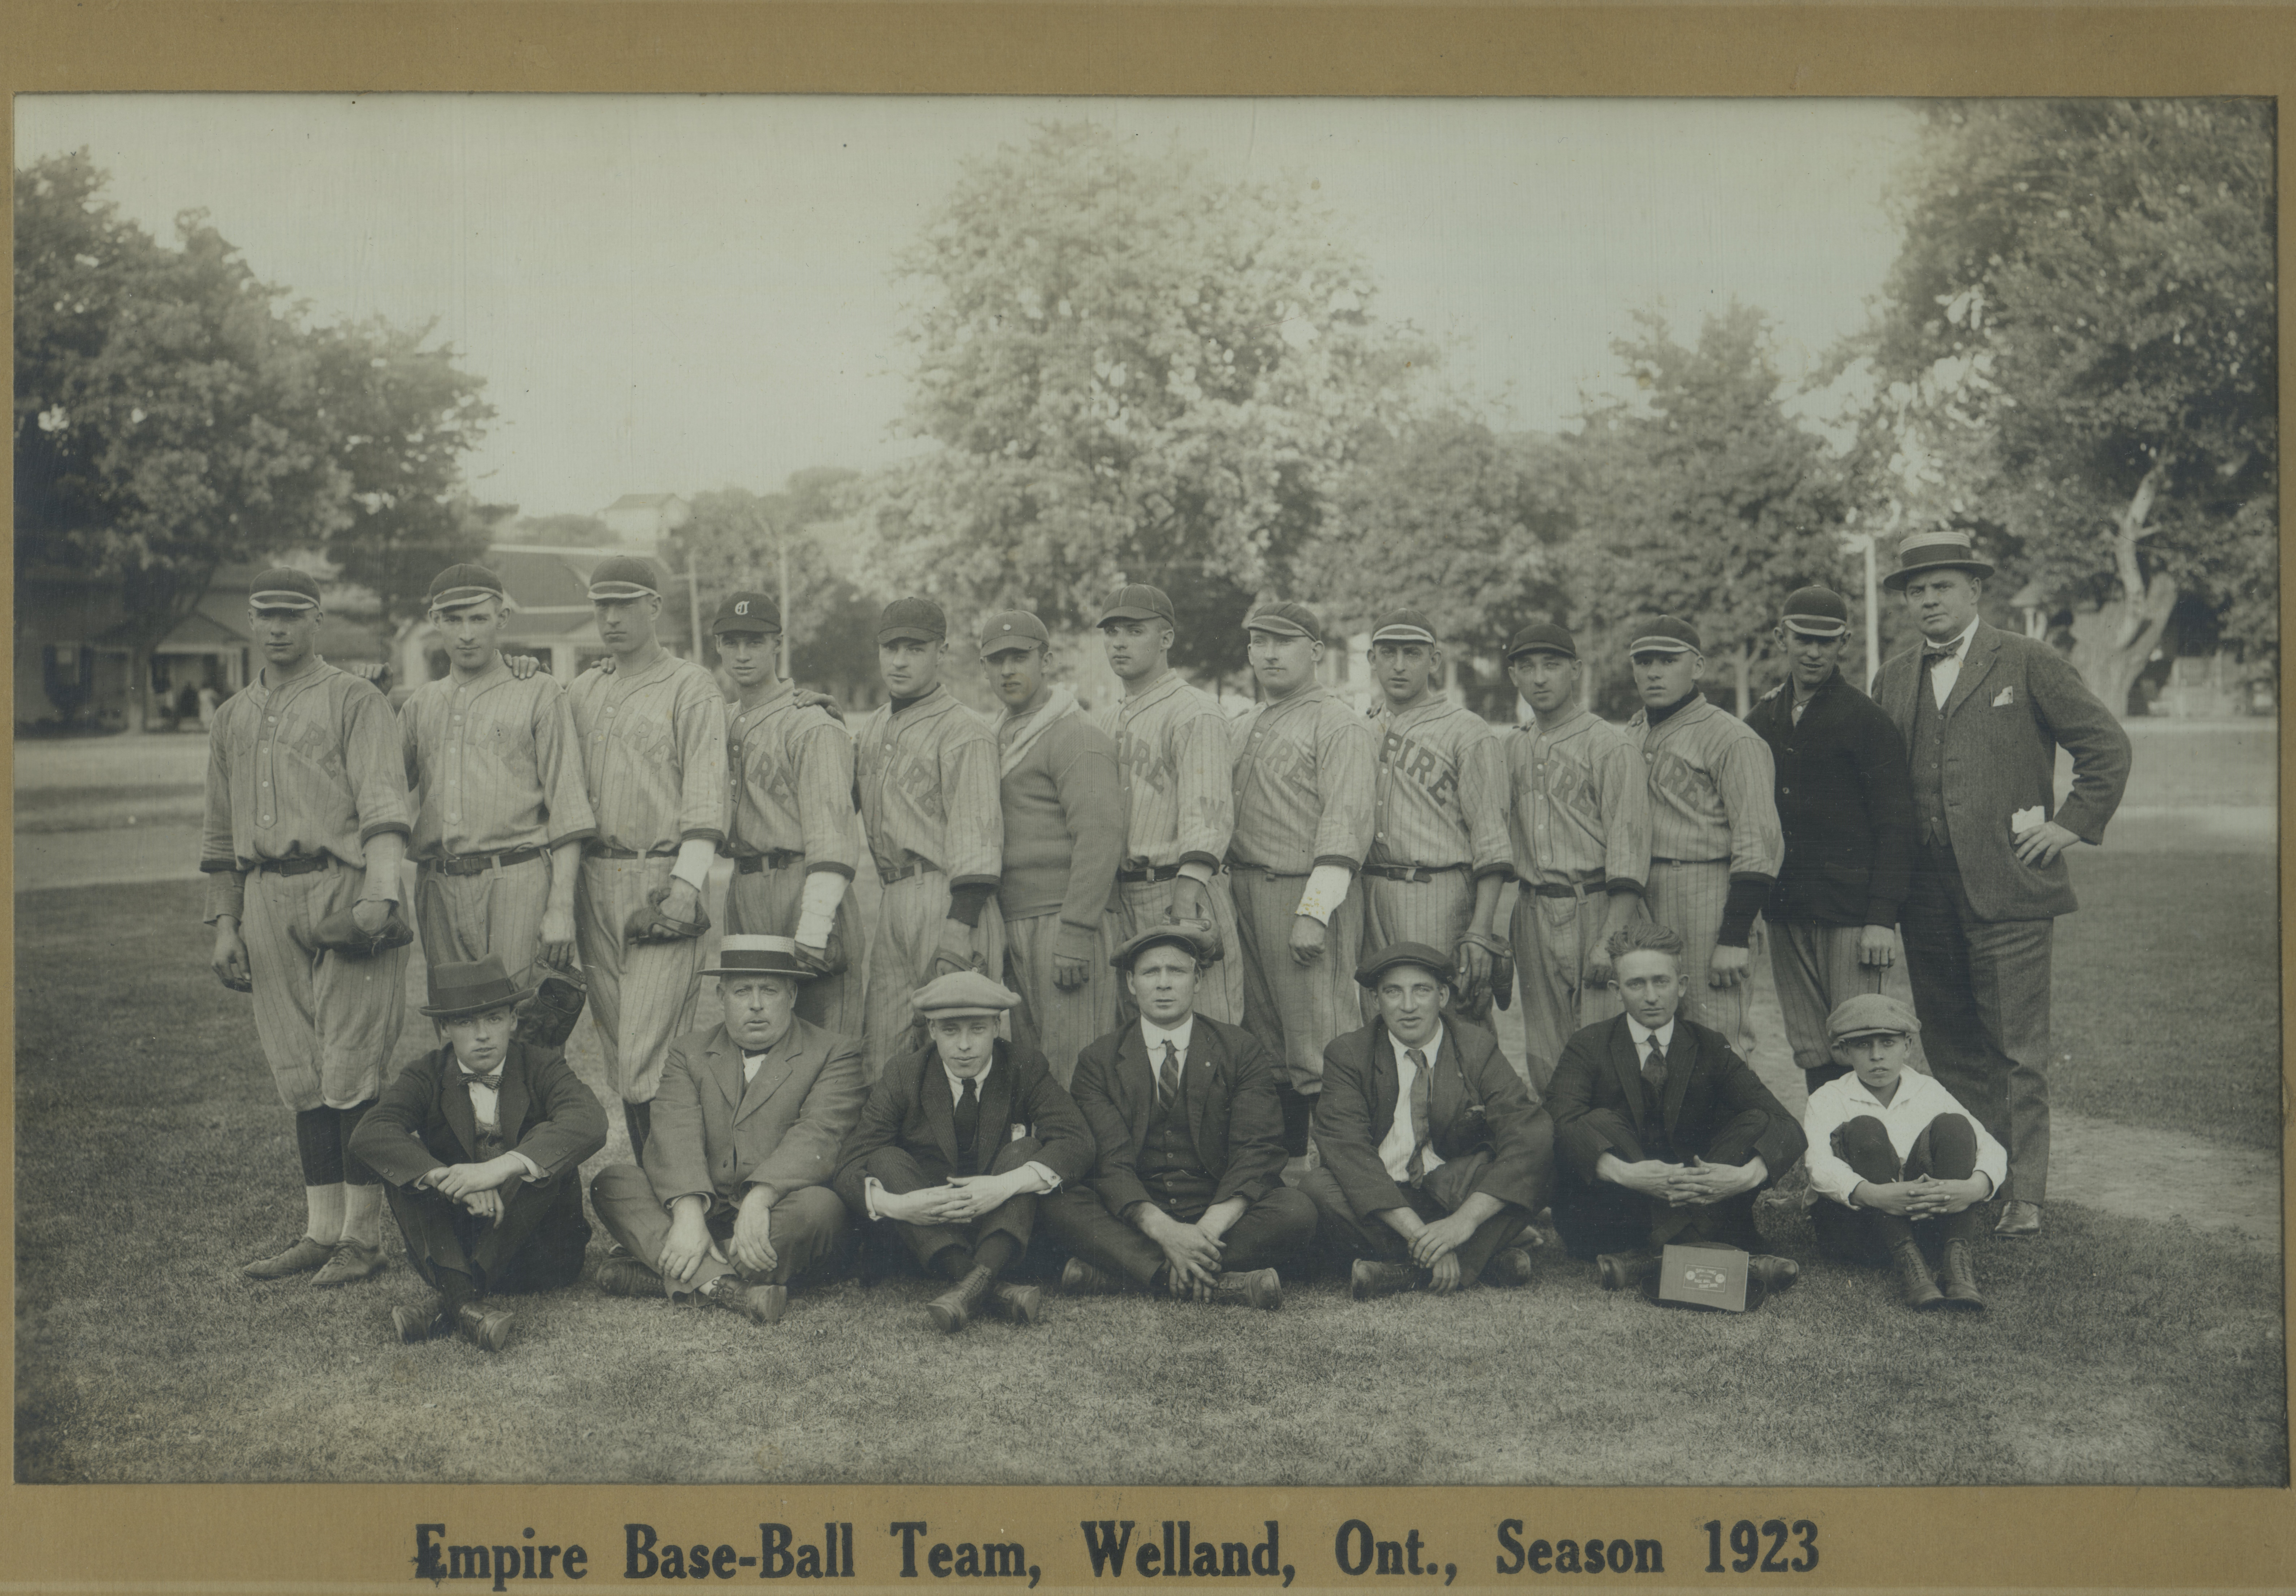 Men in baseball outfits pose for a photo in a park. On the bottom is printed "Empire base-ball team, Welland, Ontario, season 1923."